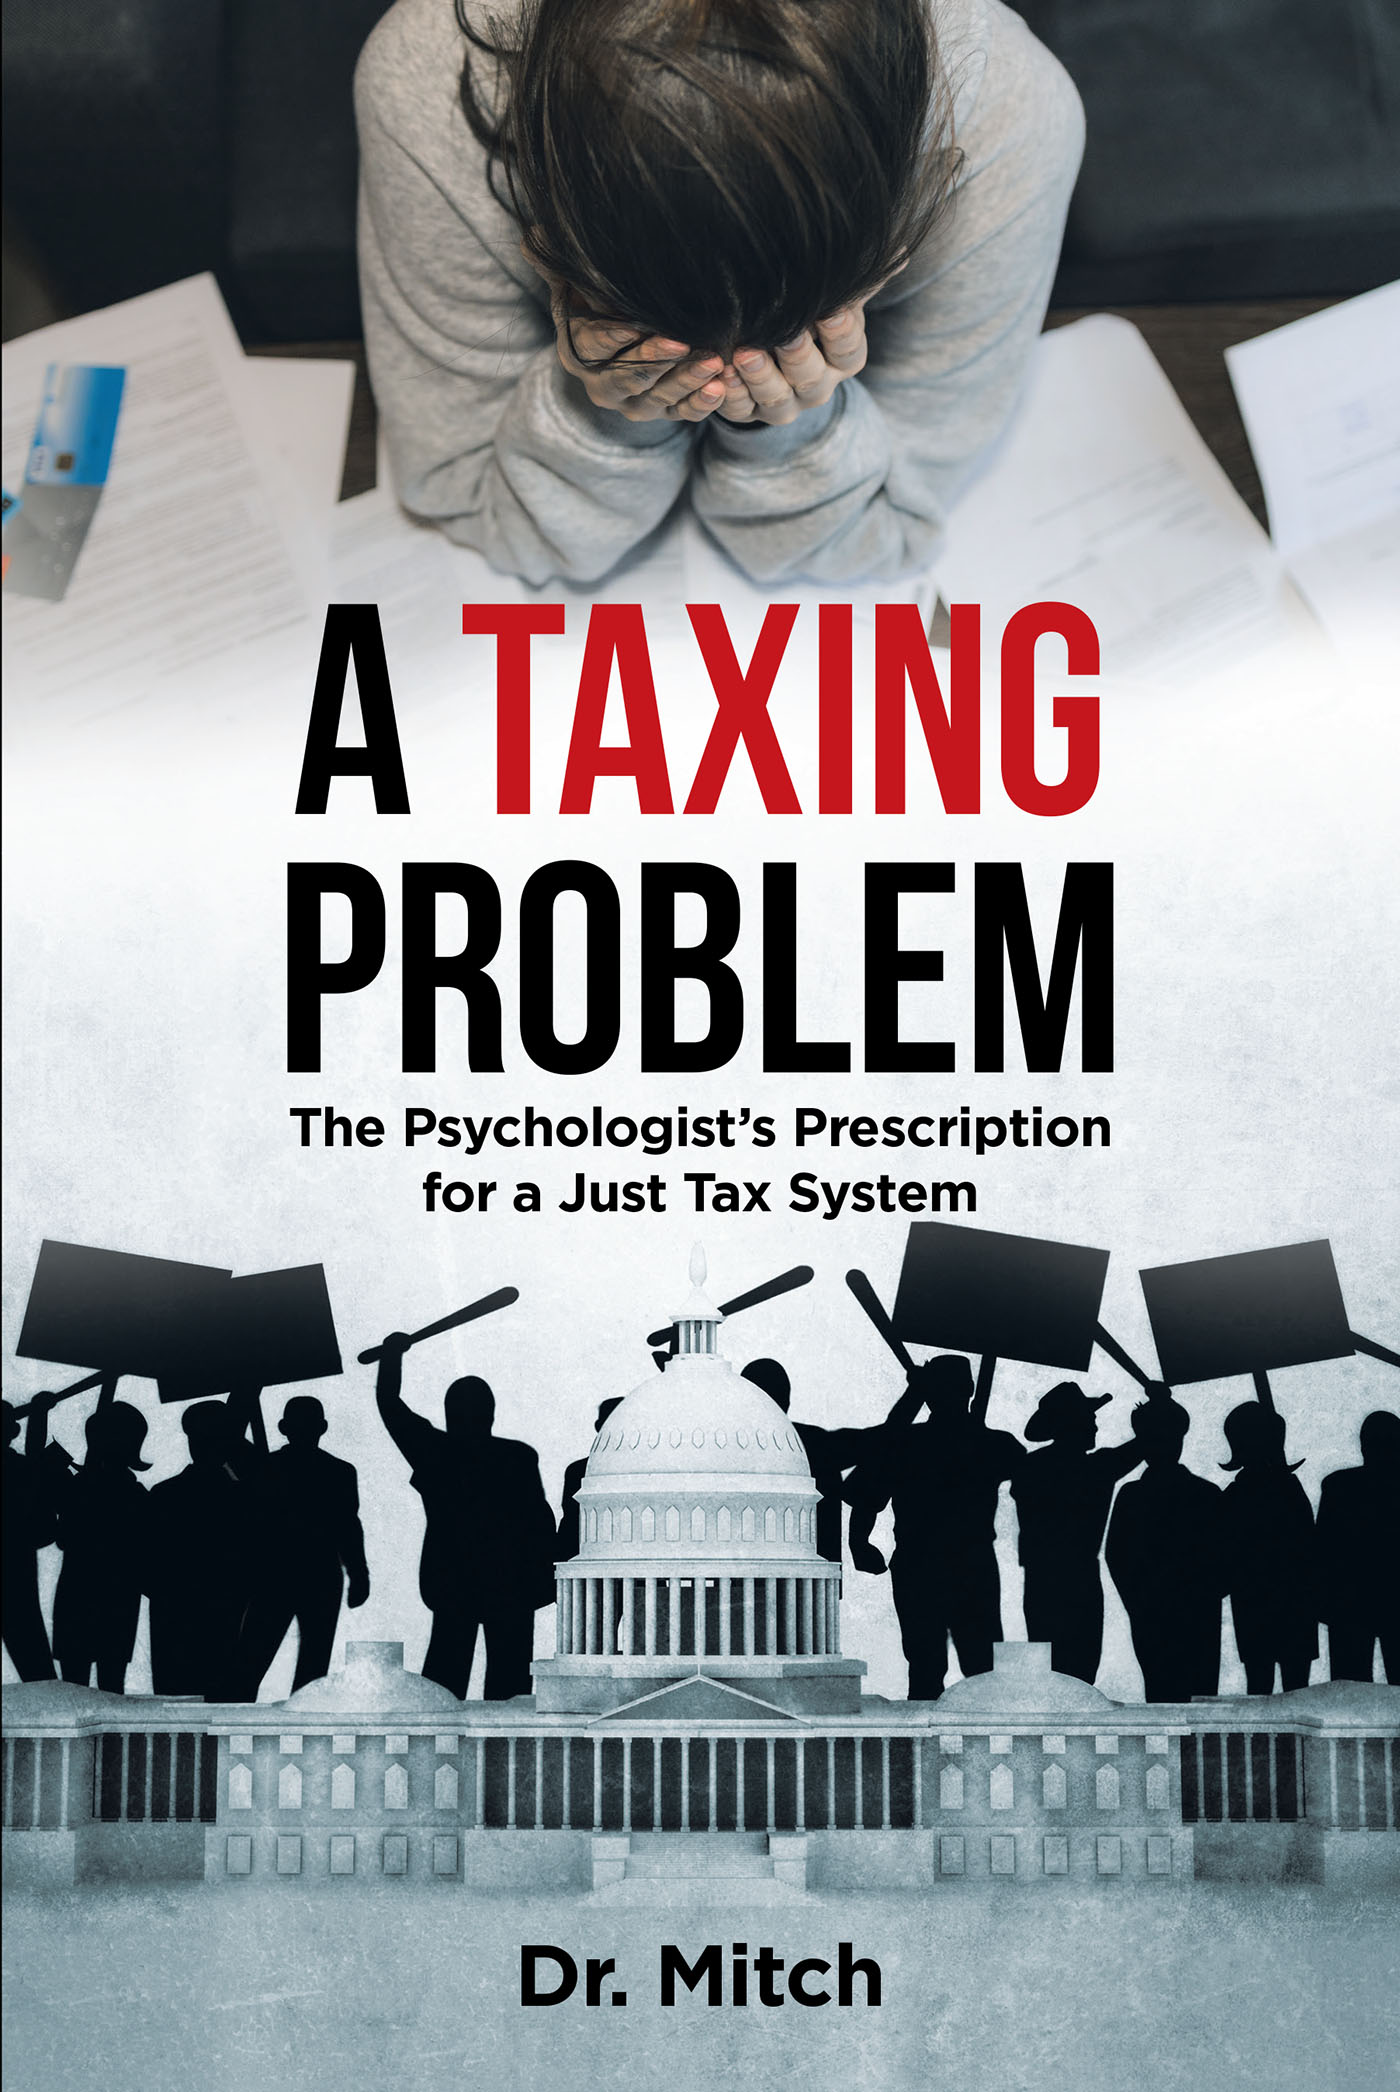 Author Dr. Mitch’s New Book, "A Taxing Problem: The Psychologist's Prescription for a Just Tax System," Examines the History of Taxation